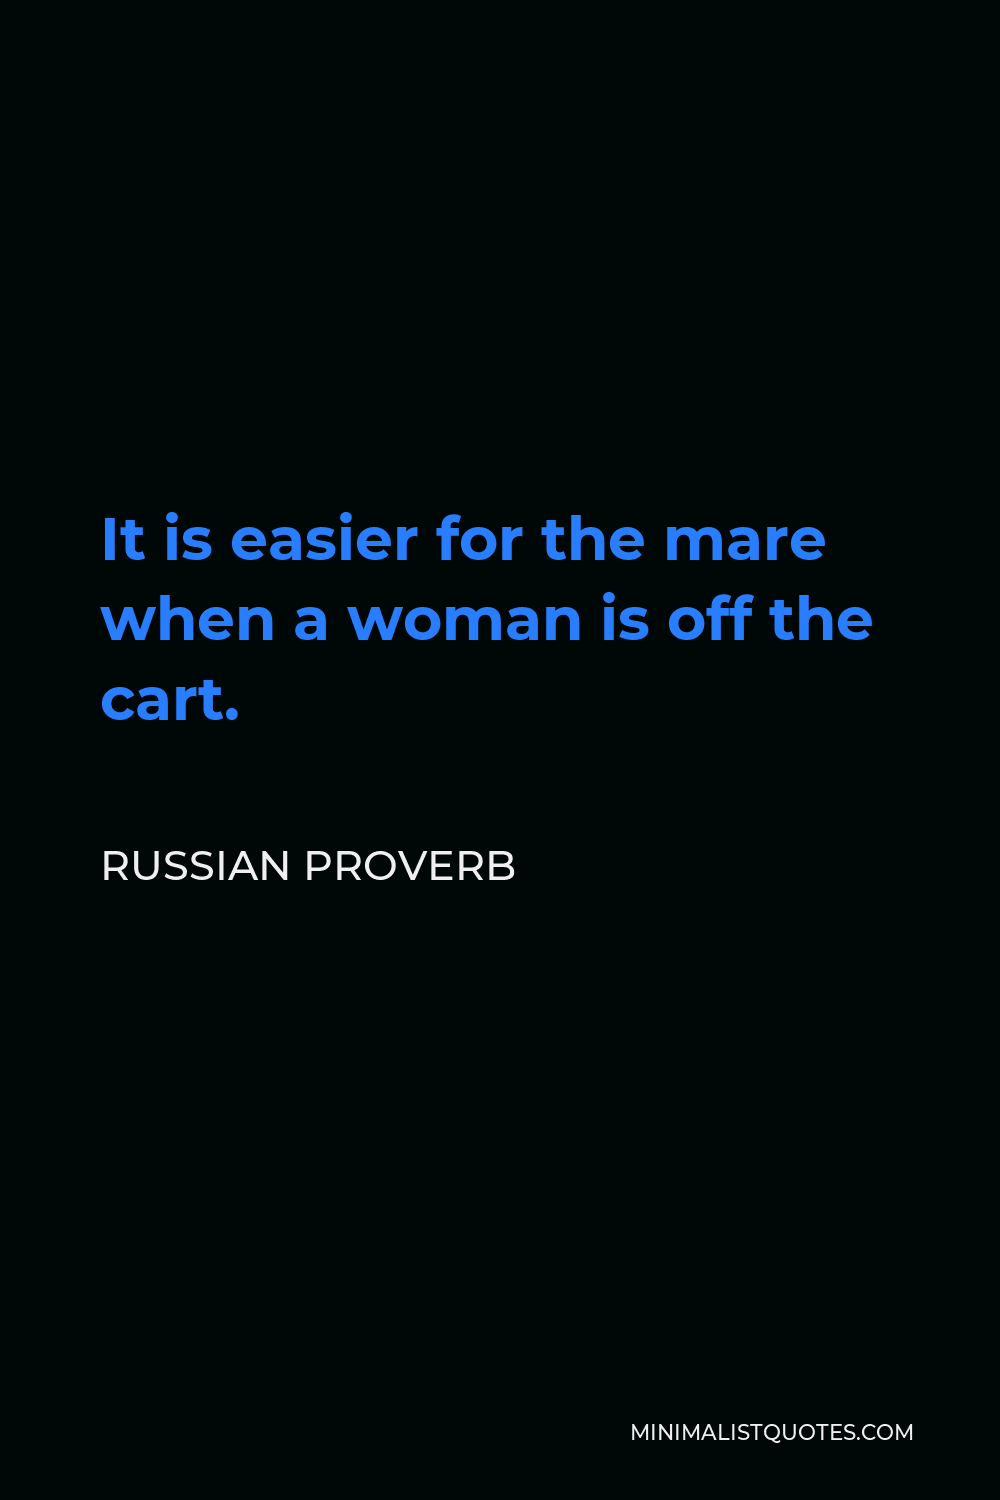 Russian Proverb Quote - It is easier for the mare when a woman is off the cart.